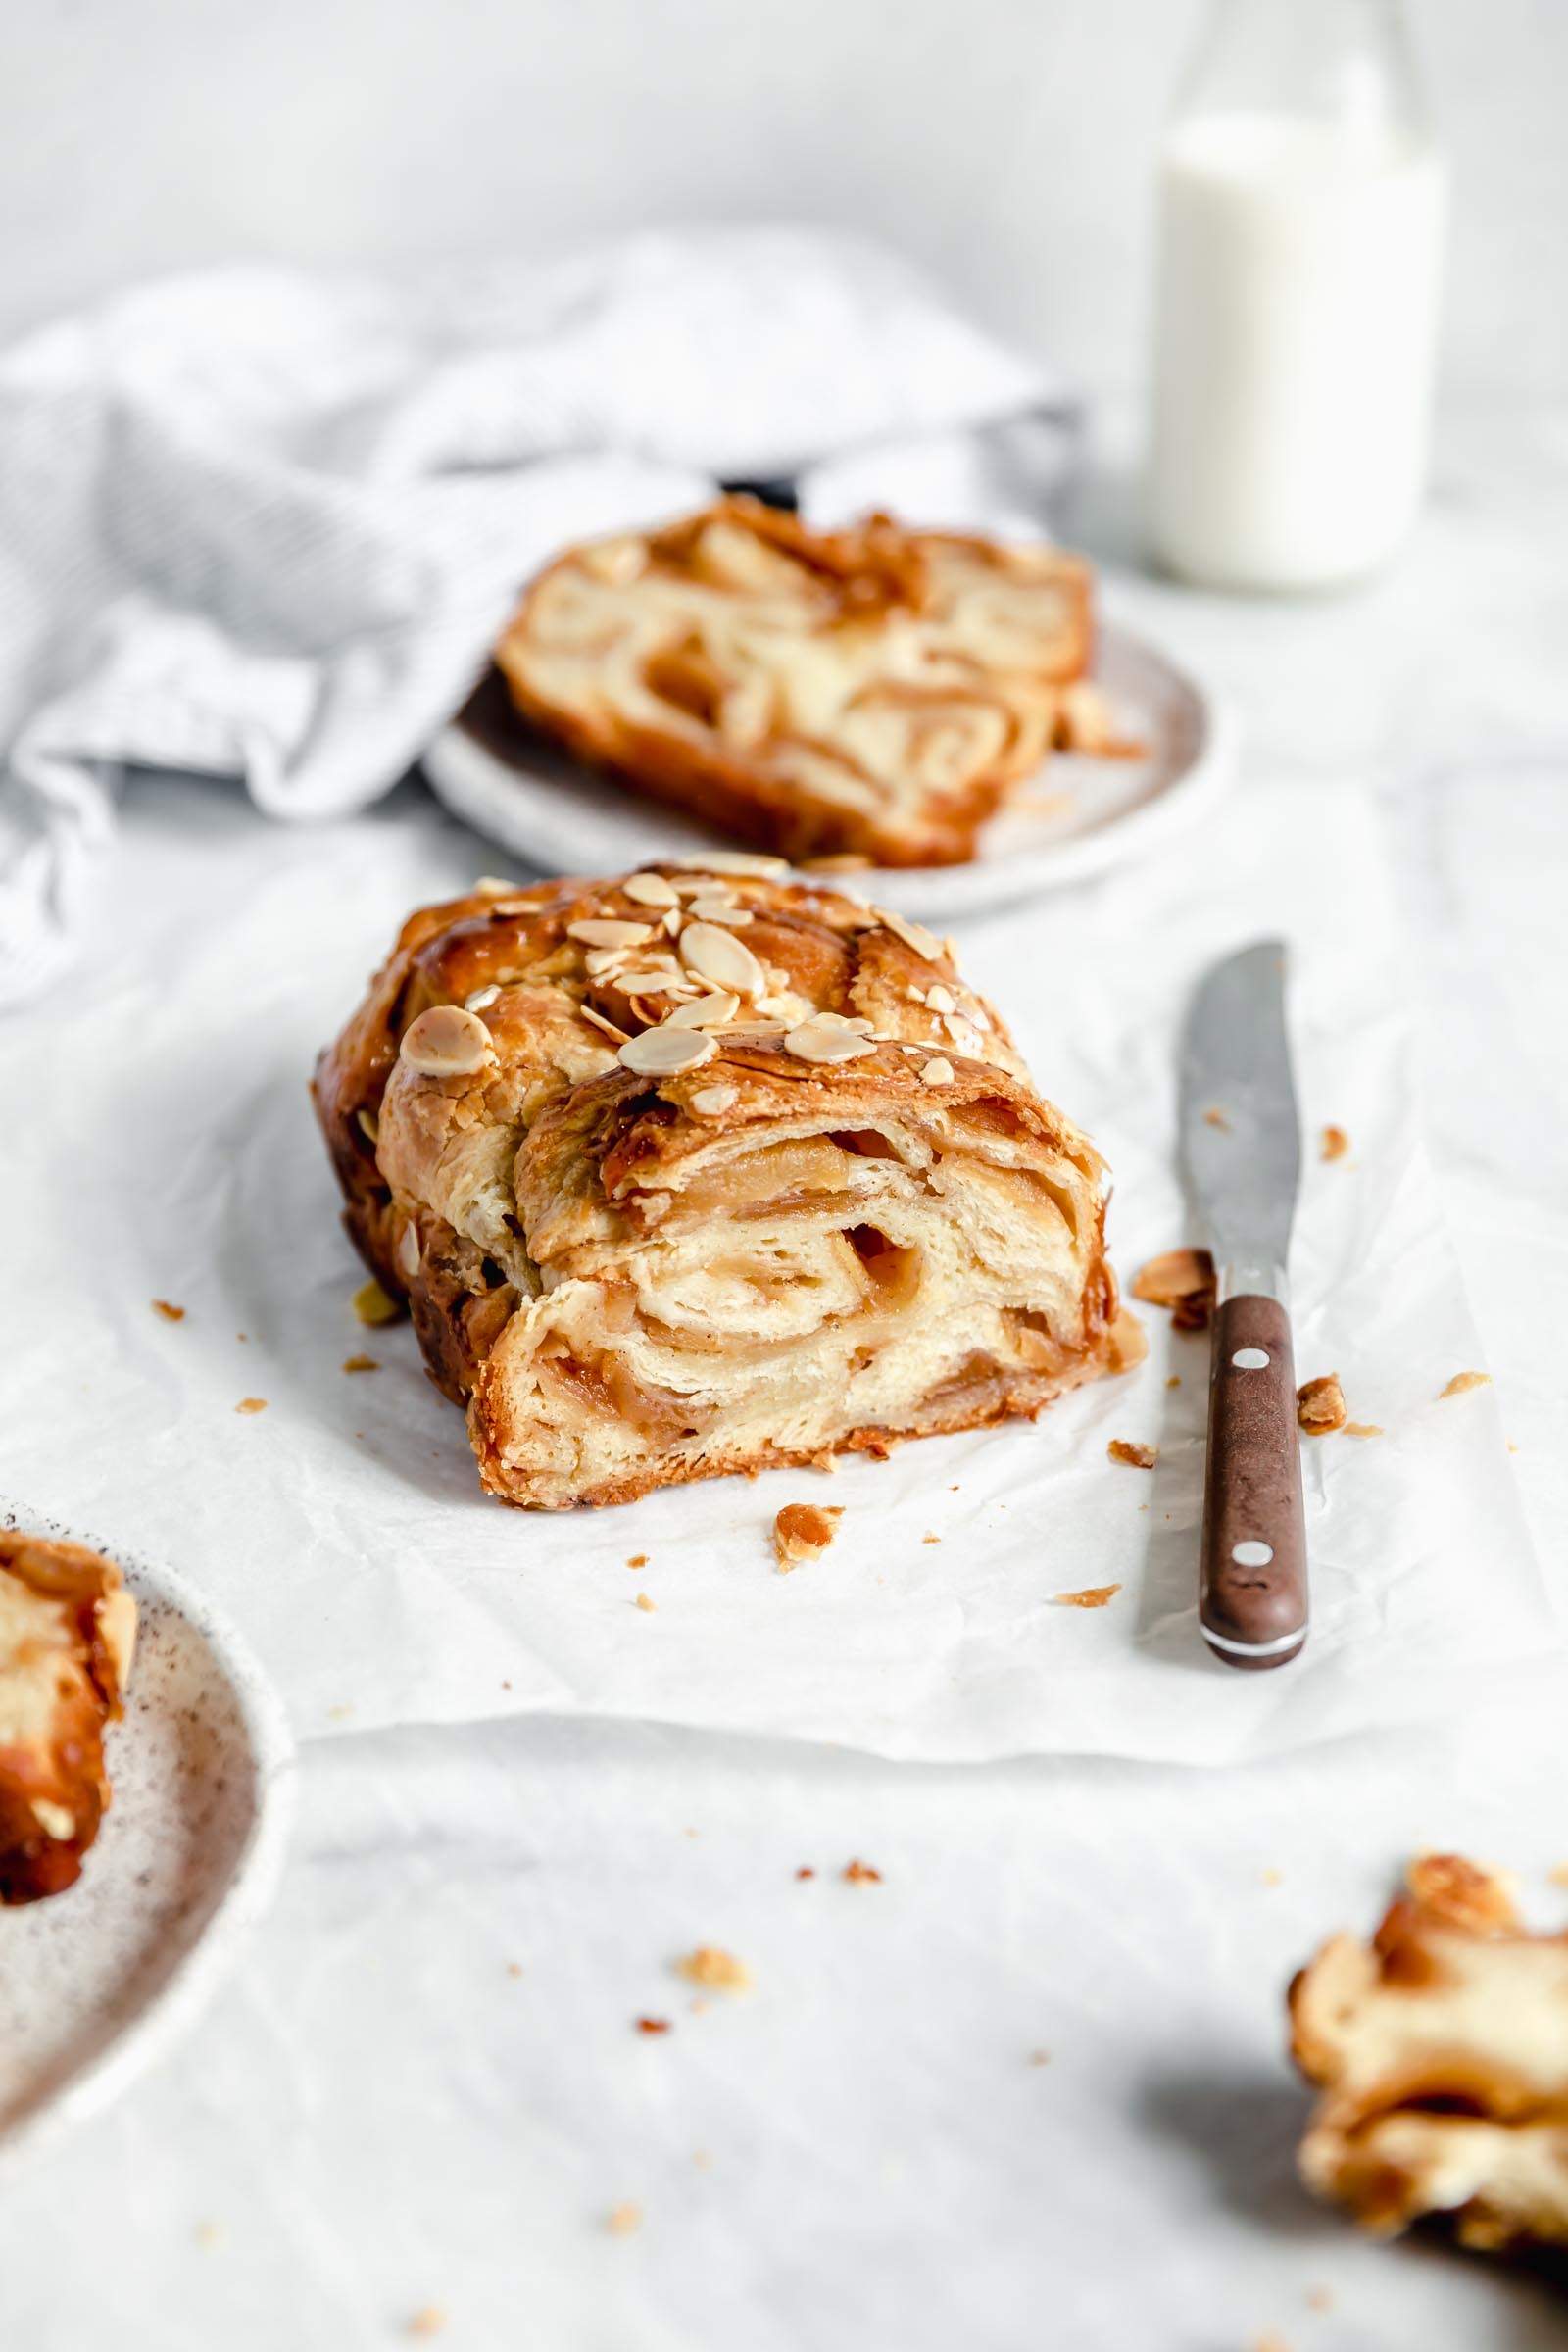 apple babka cross section with slices of bread swirled with apples